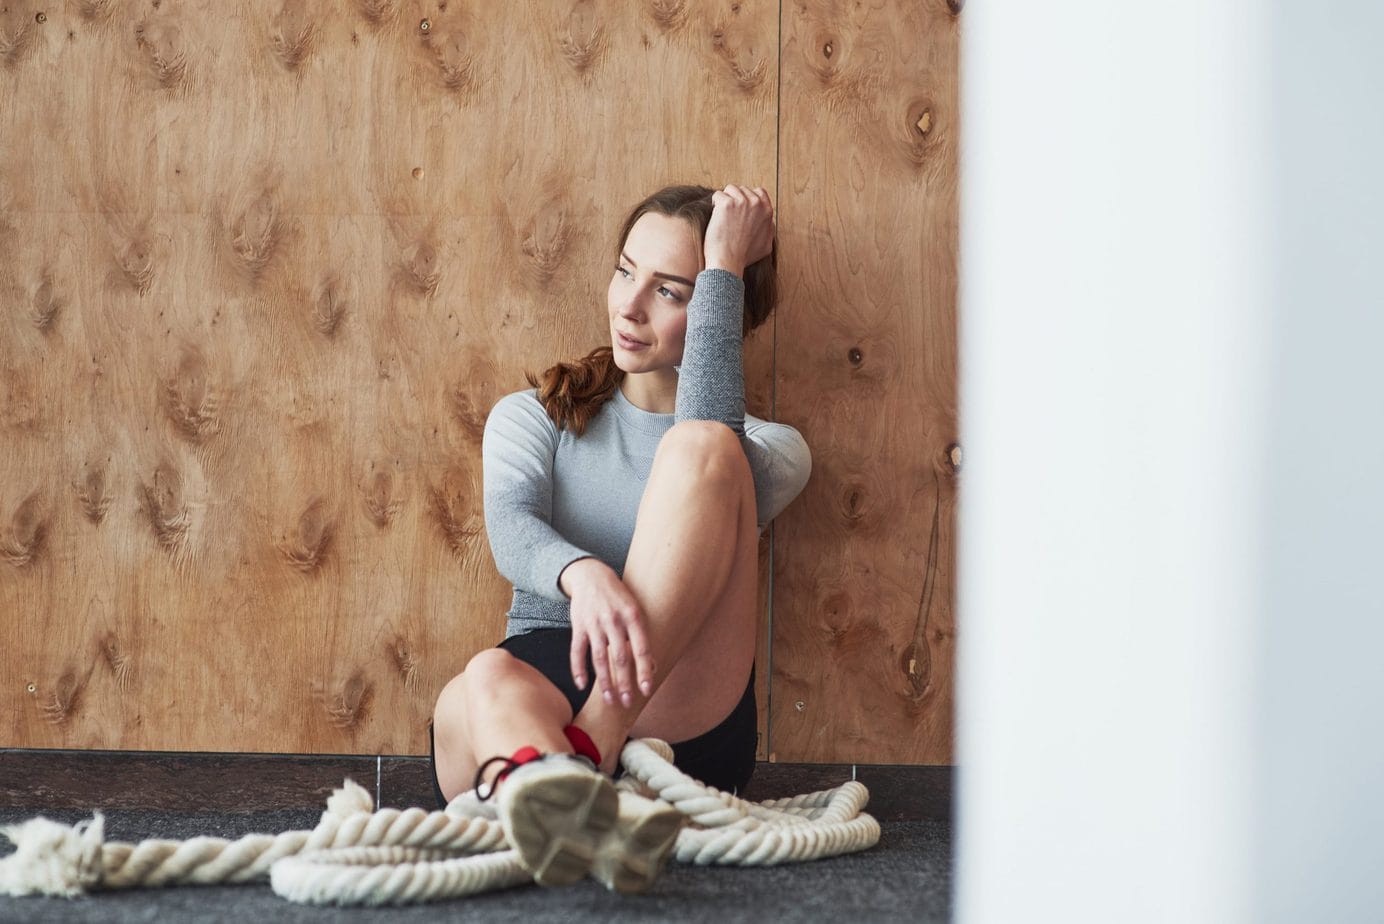 Apathy and lack of motivation to exercise – how does the menstrual cycle affect training?